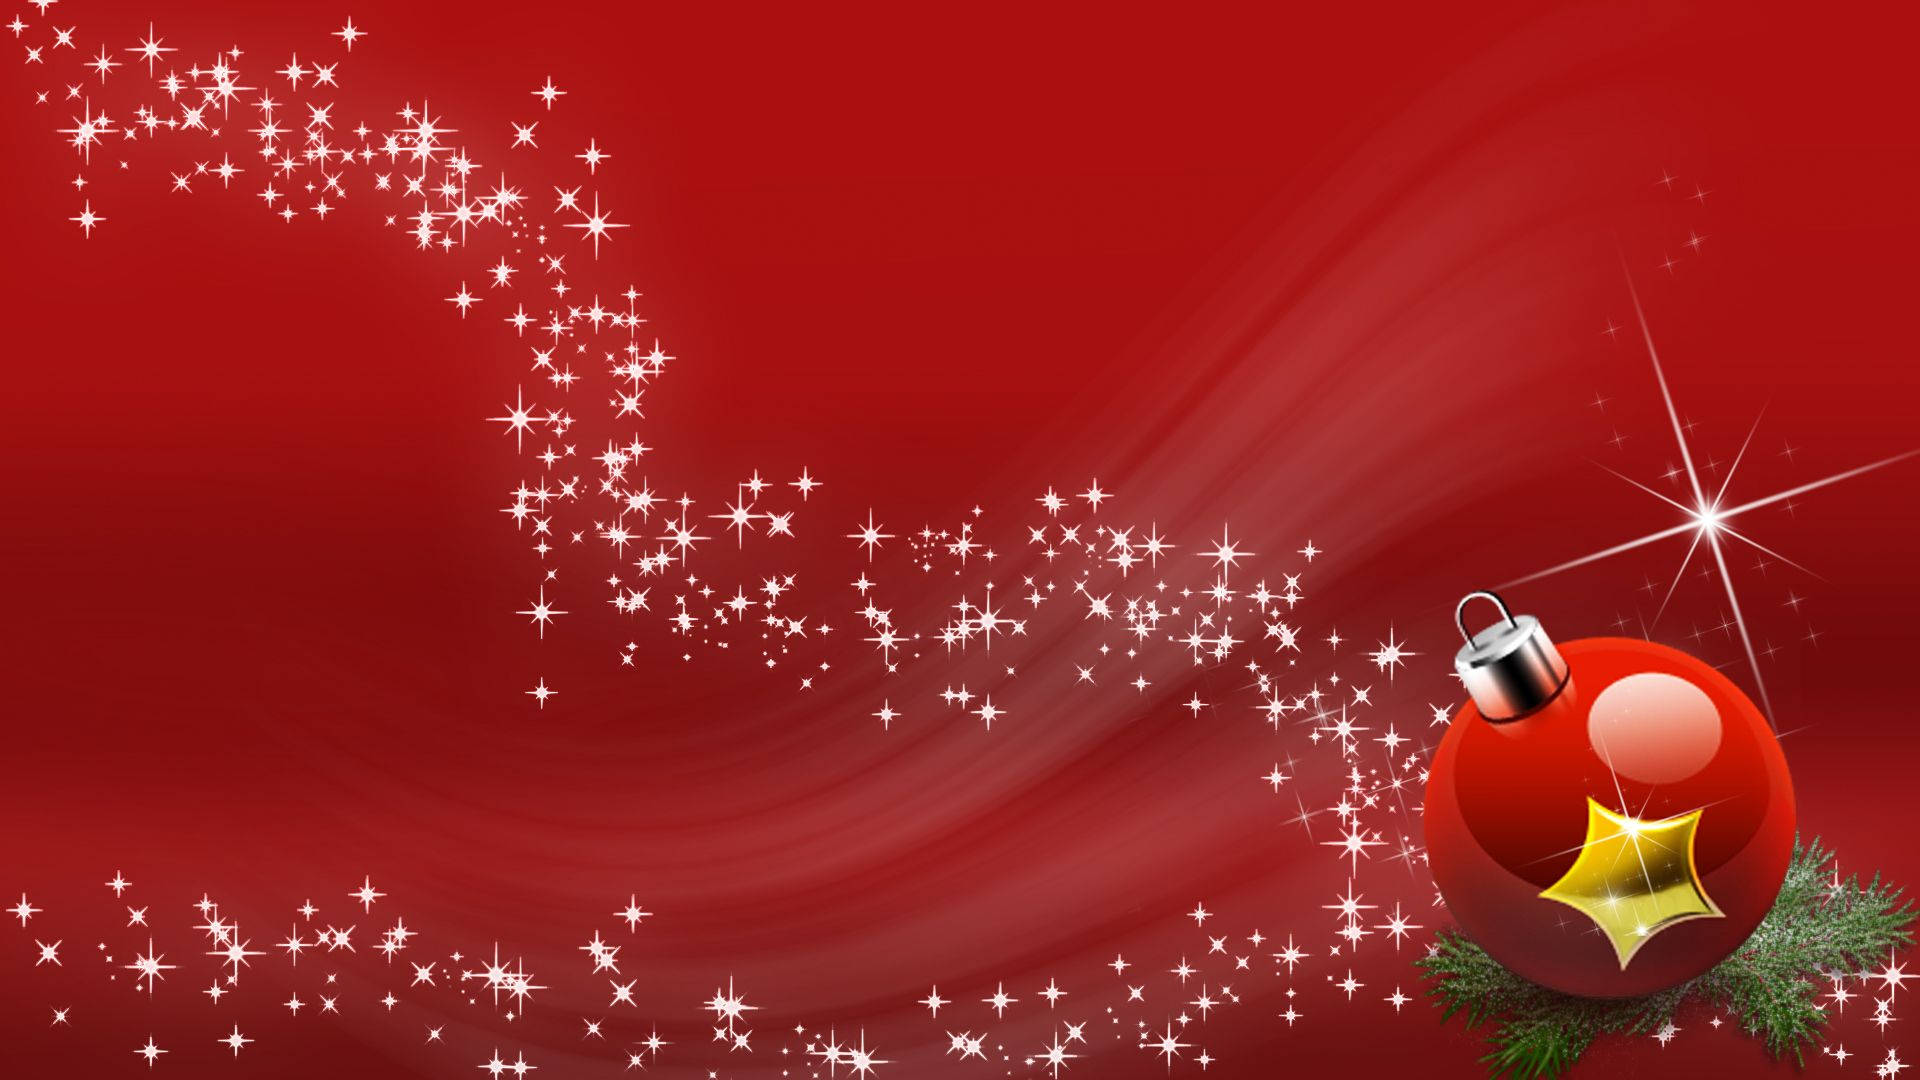 Dazzling Christmas Background Wallpaper